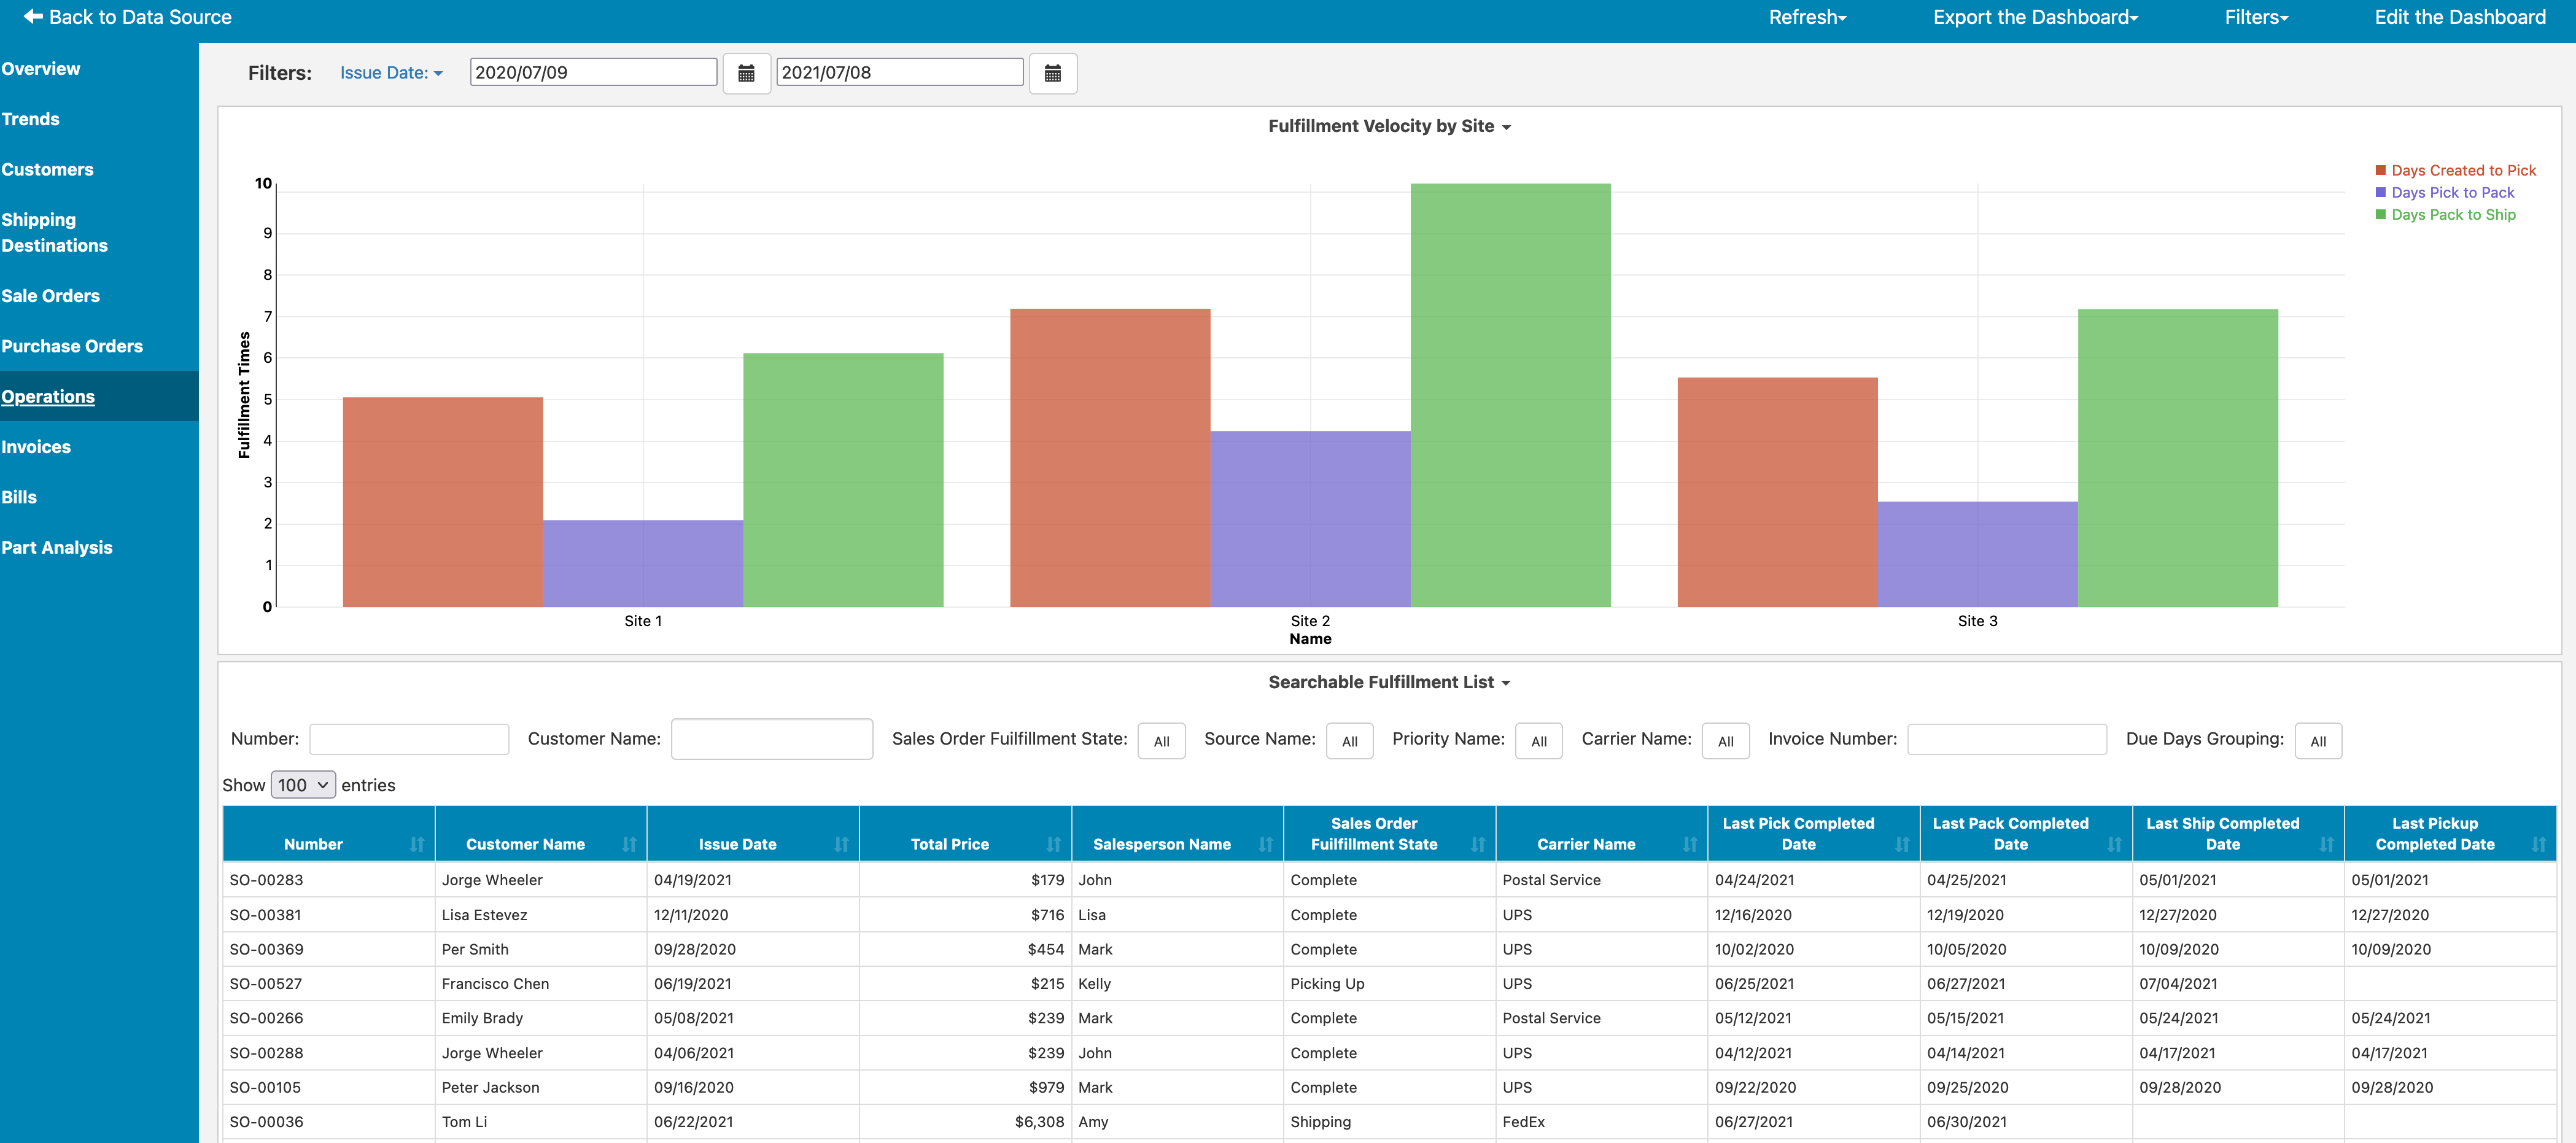 LOCATE Inventory Dashboard Overview